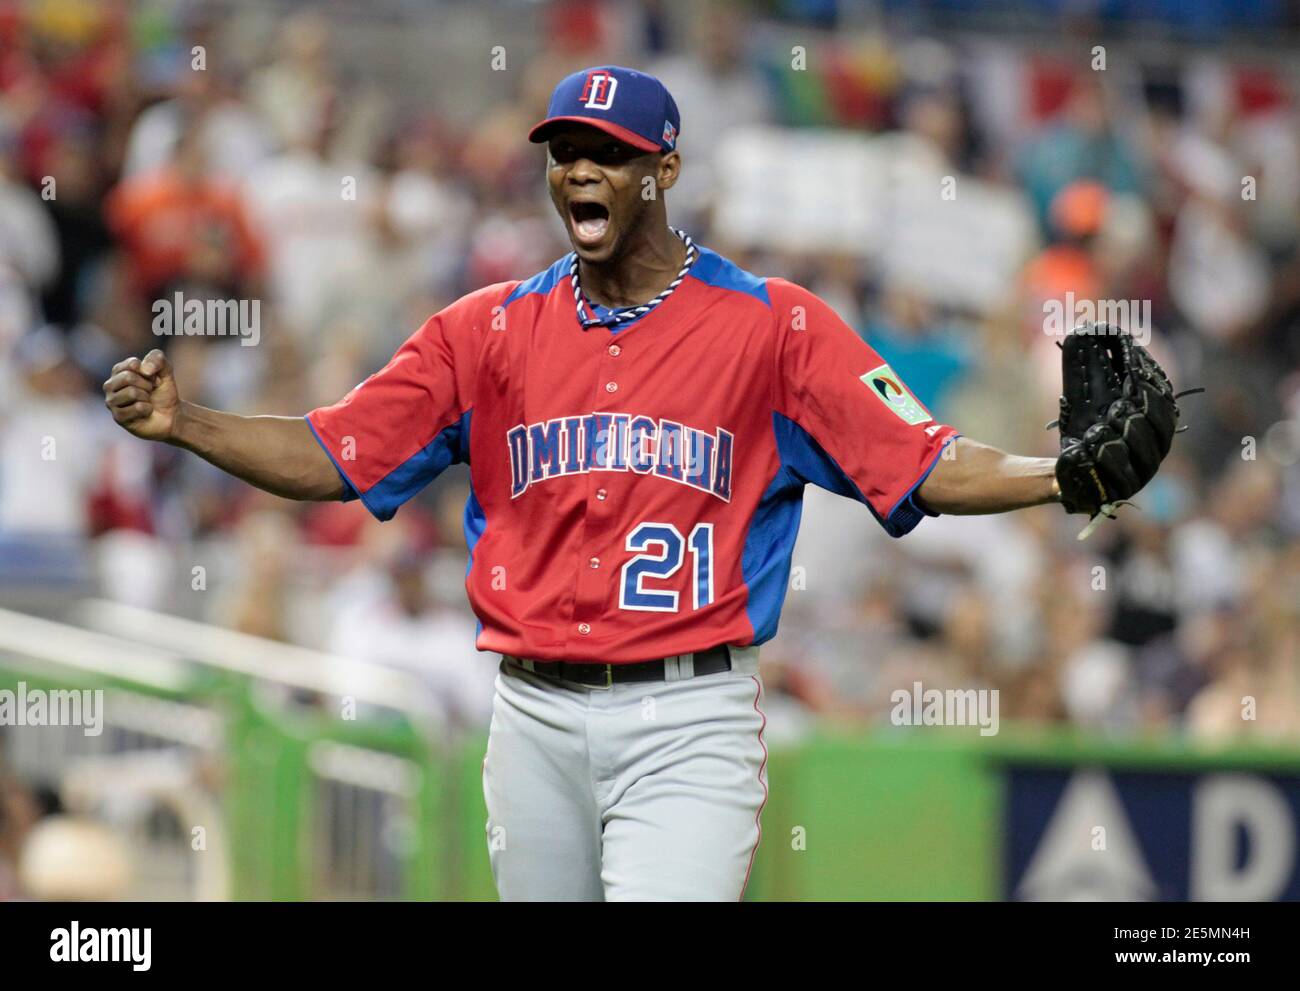 Dominican Republic starting pitcher Samuel Deduno reacts after a strikeout to end the fourth inning against the U.S. during a 2013 World Baseball Classic game in Miami, Florida March 14, 2013.  REUTERS/Joe Skipper  (UNITED STATES - Tags: SPORT BASEBALL) Stock Photo